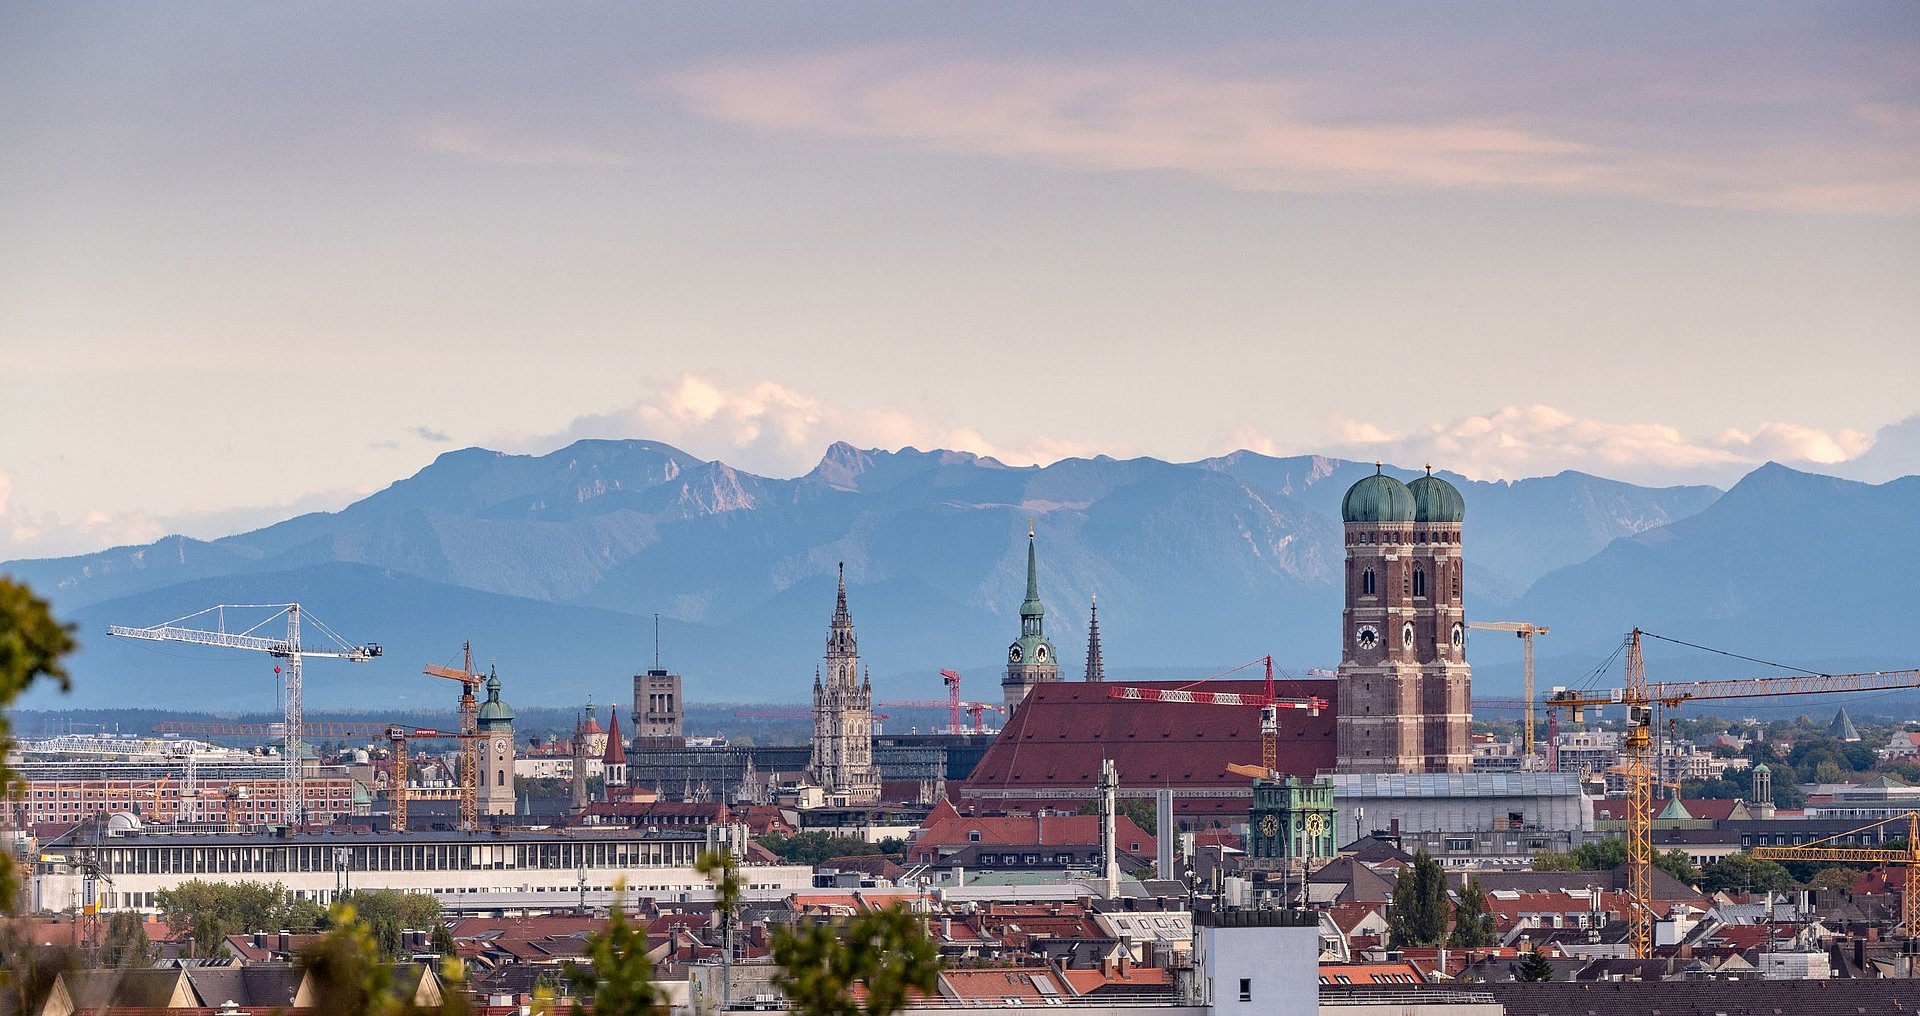 Shot of the city of Munich from above with a panorama of the Alps in the background